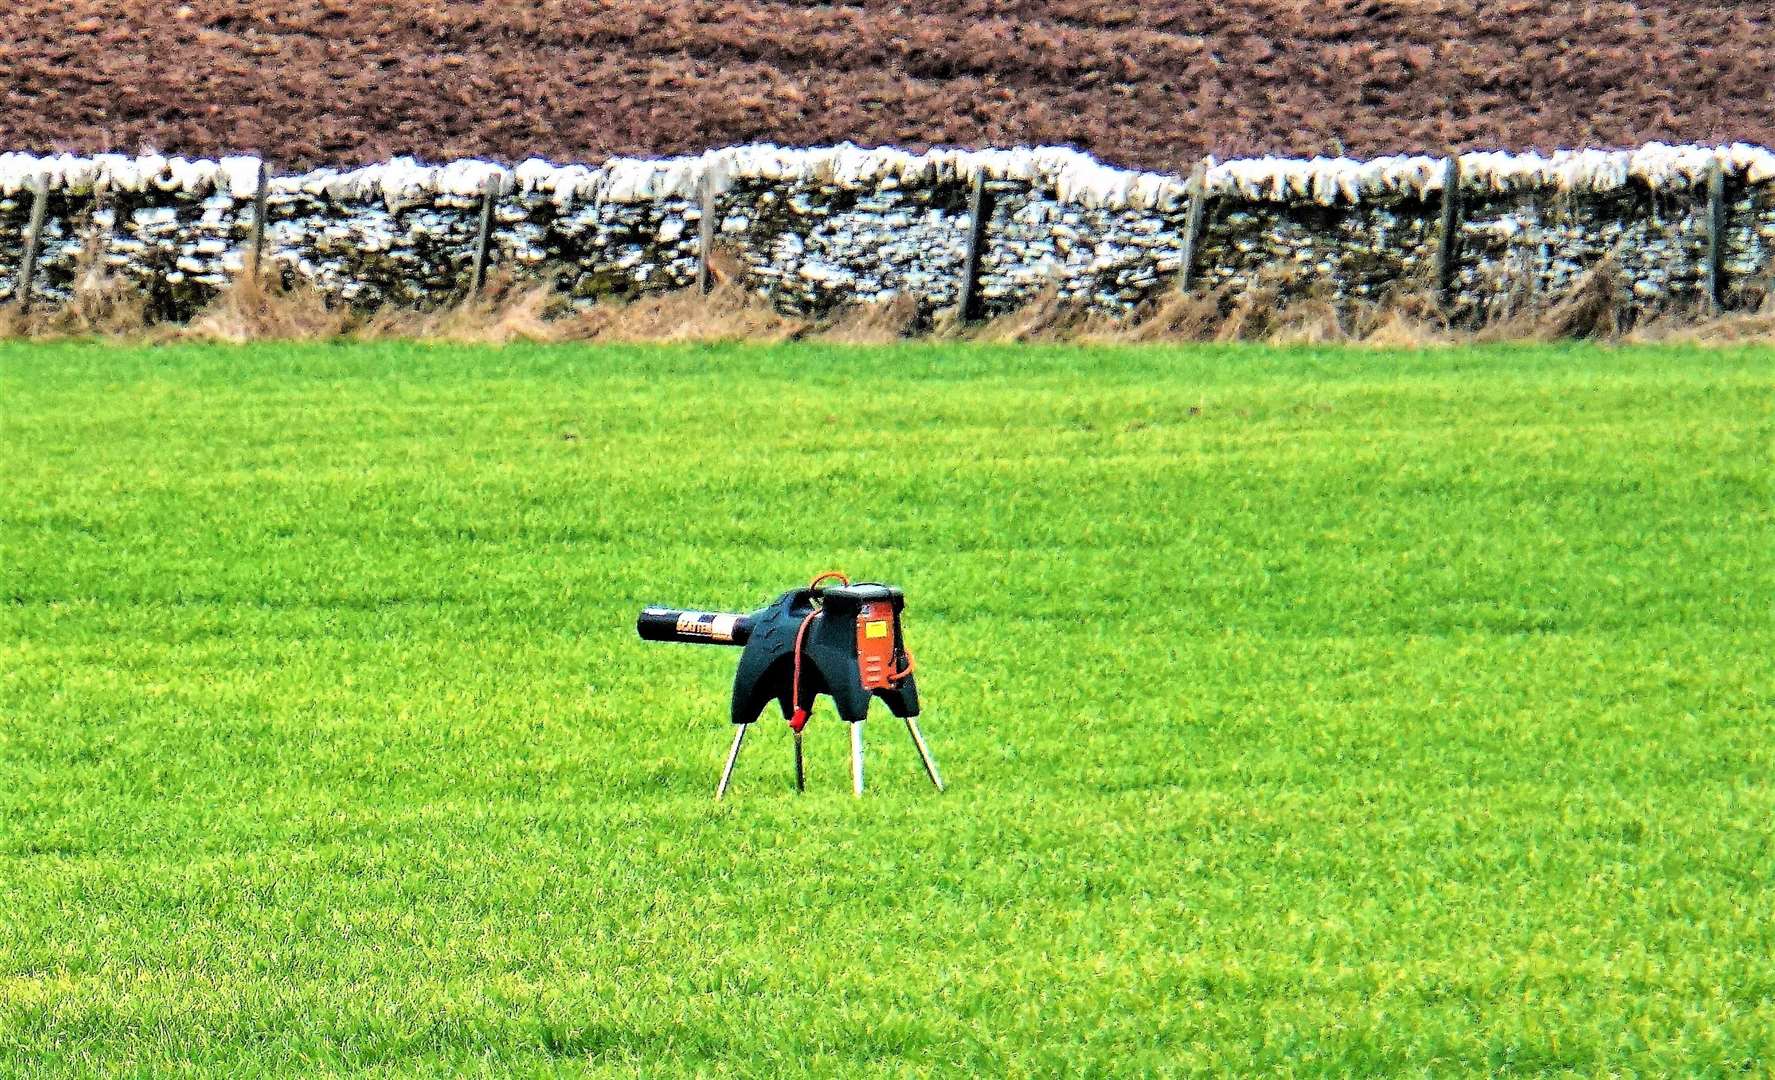 Bird scaring device in a field near Brabsterdorran in Caithness. Farmers adjust the firing times to include an automatic dawn start-up and dusk shut off but would not operate them throughout the night. Picture: DGS